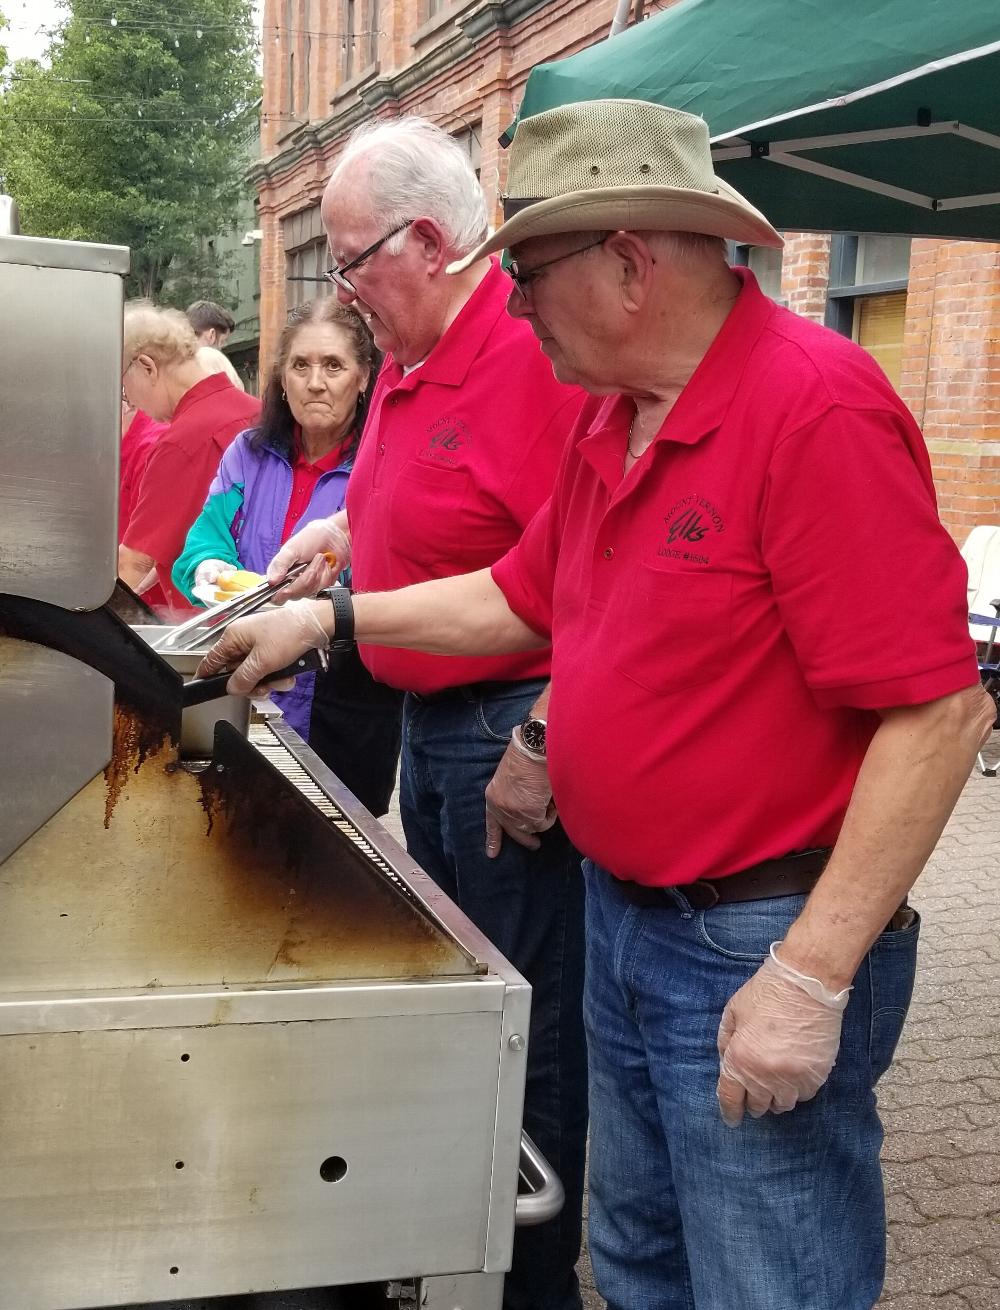 Don Hammond and Ed Anderson cooking up some Hamburgers